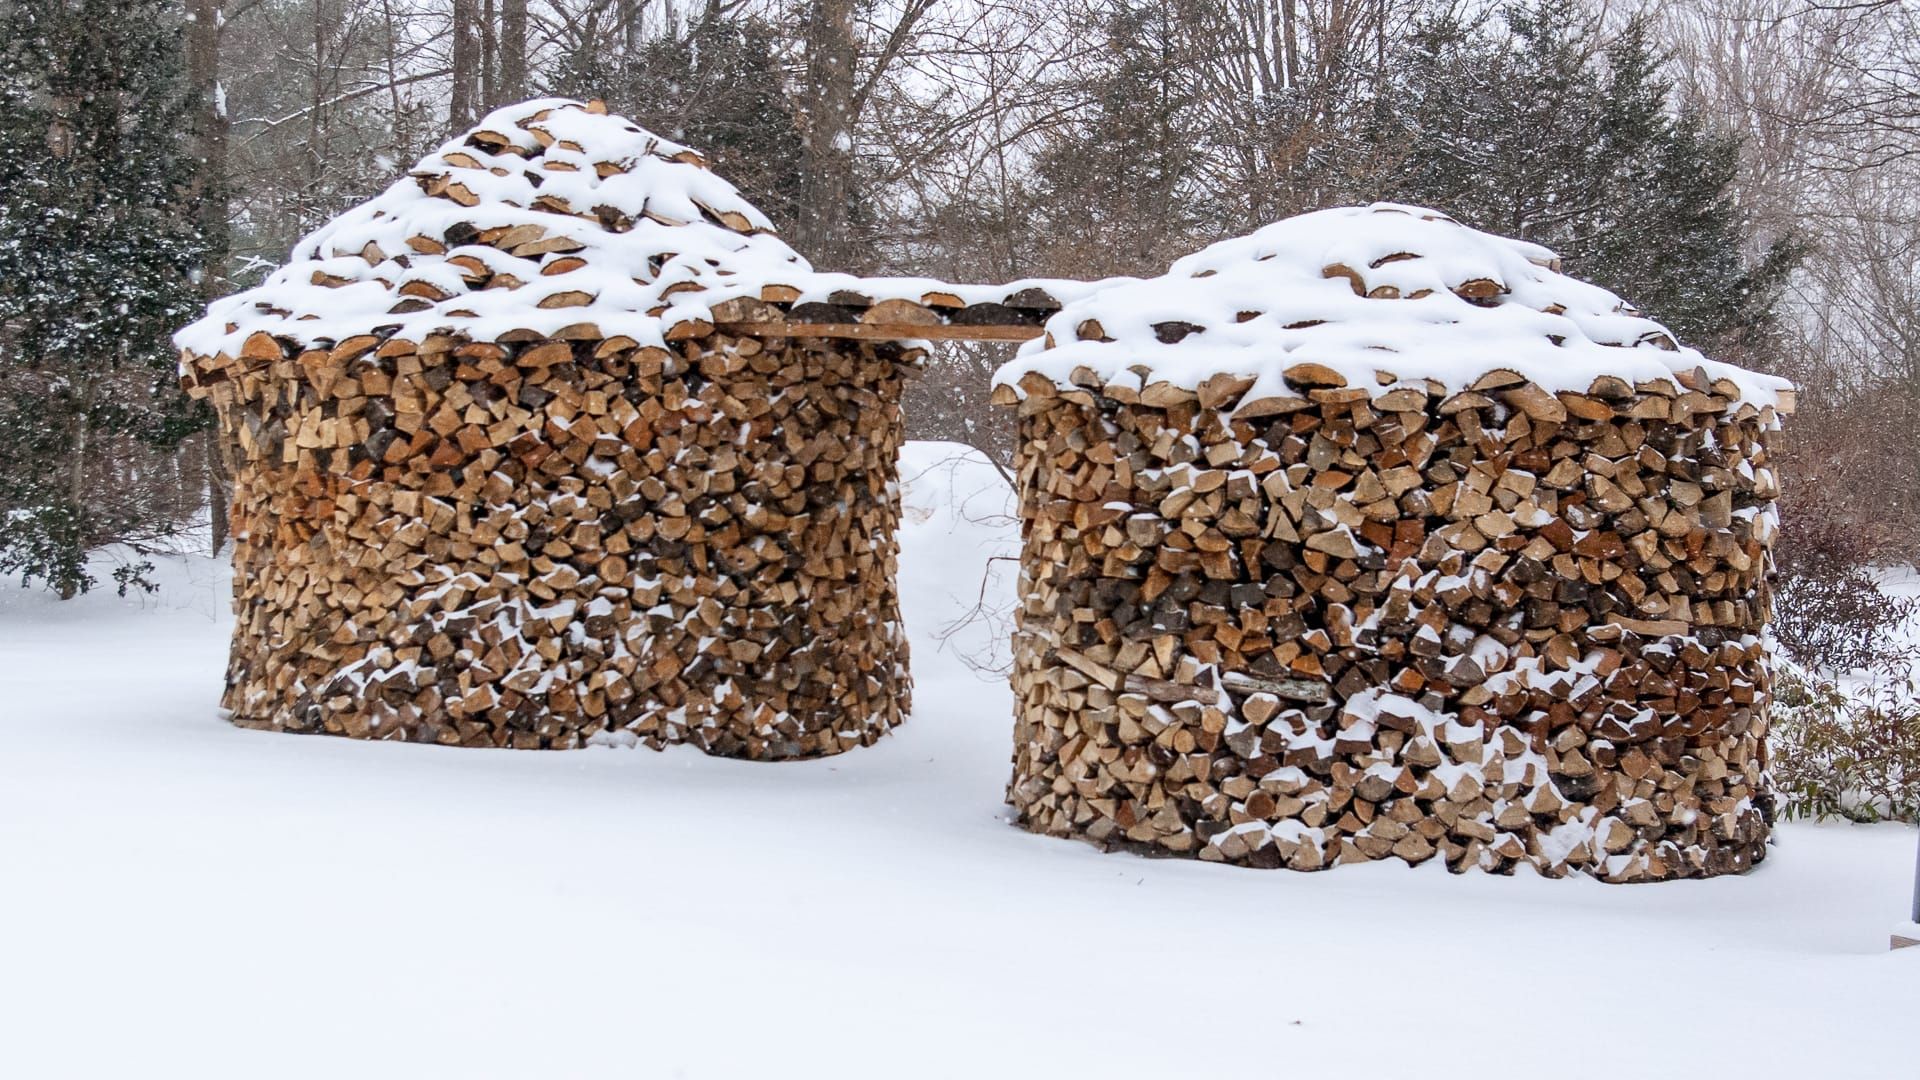 holz hausen firewood stacks in snowy outdoors